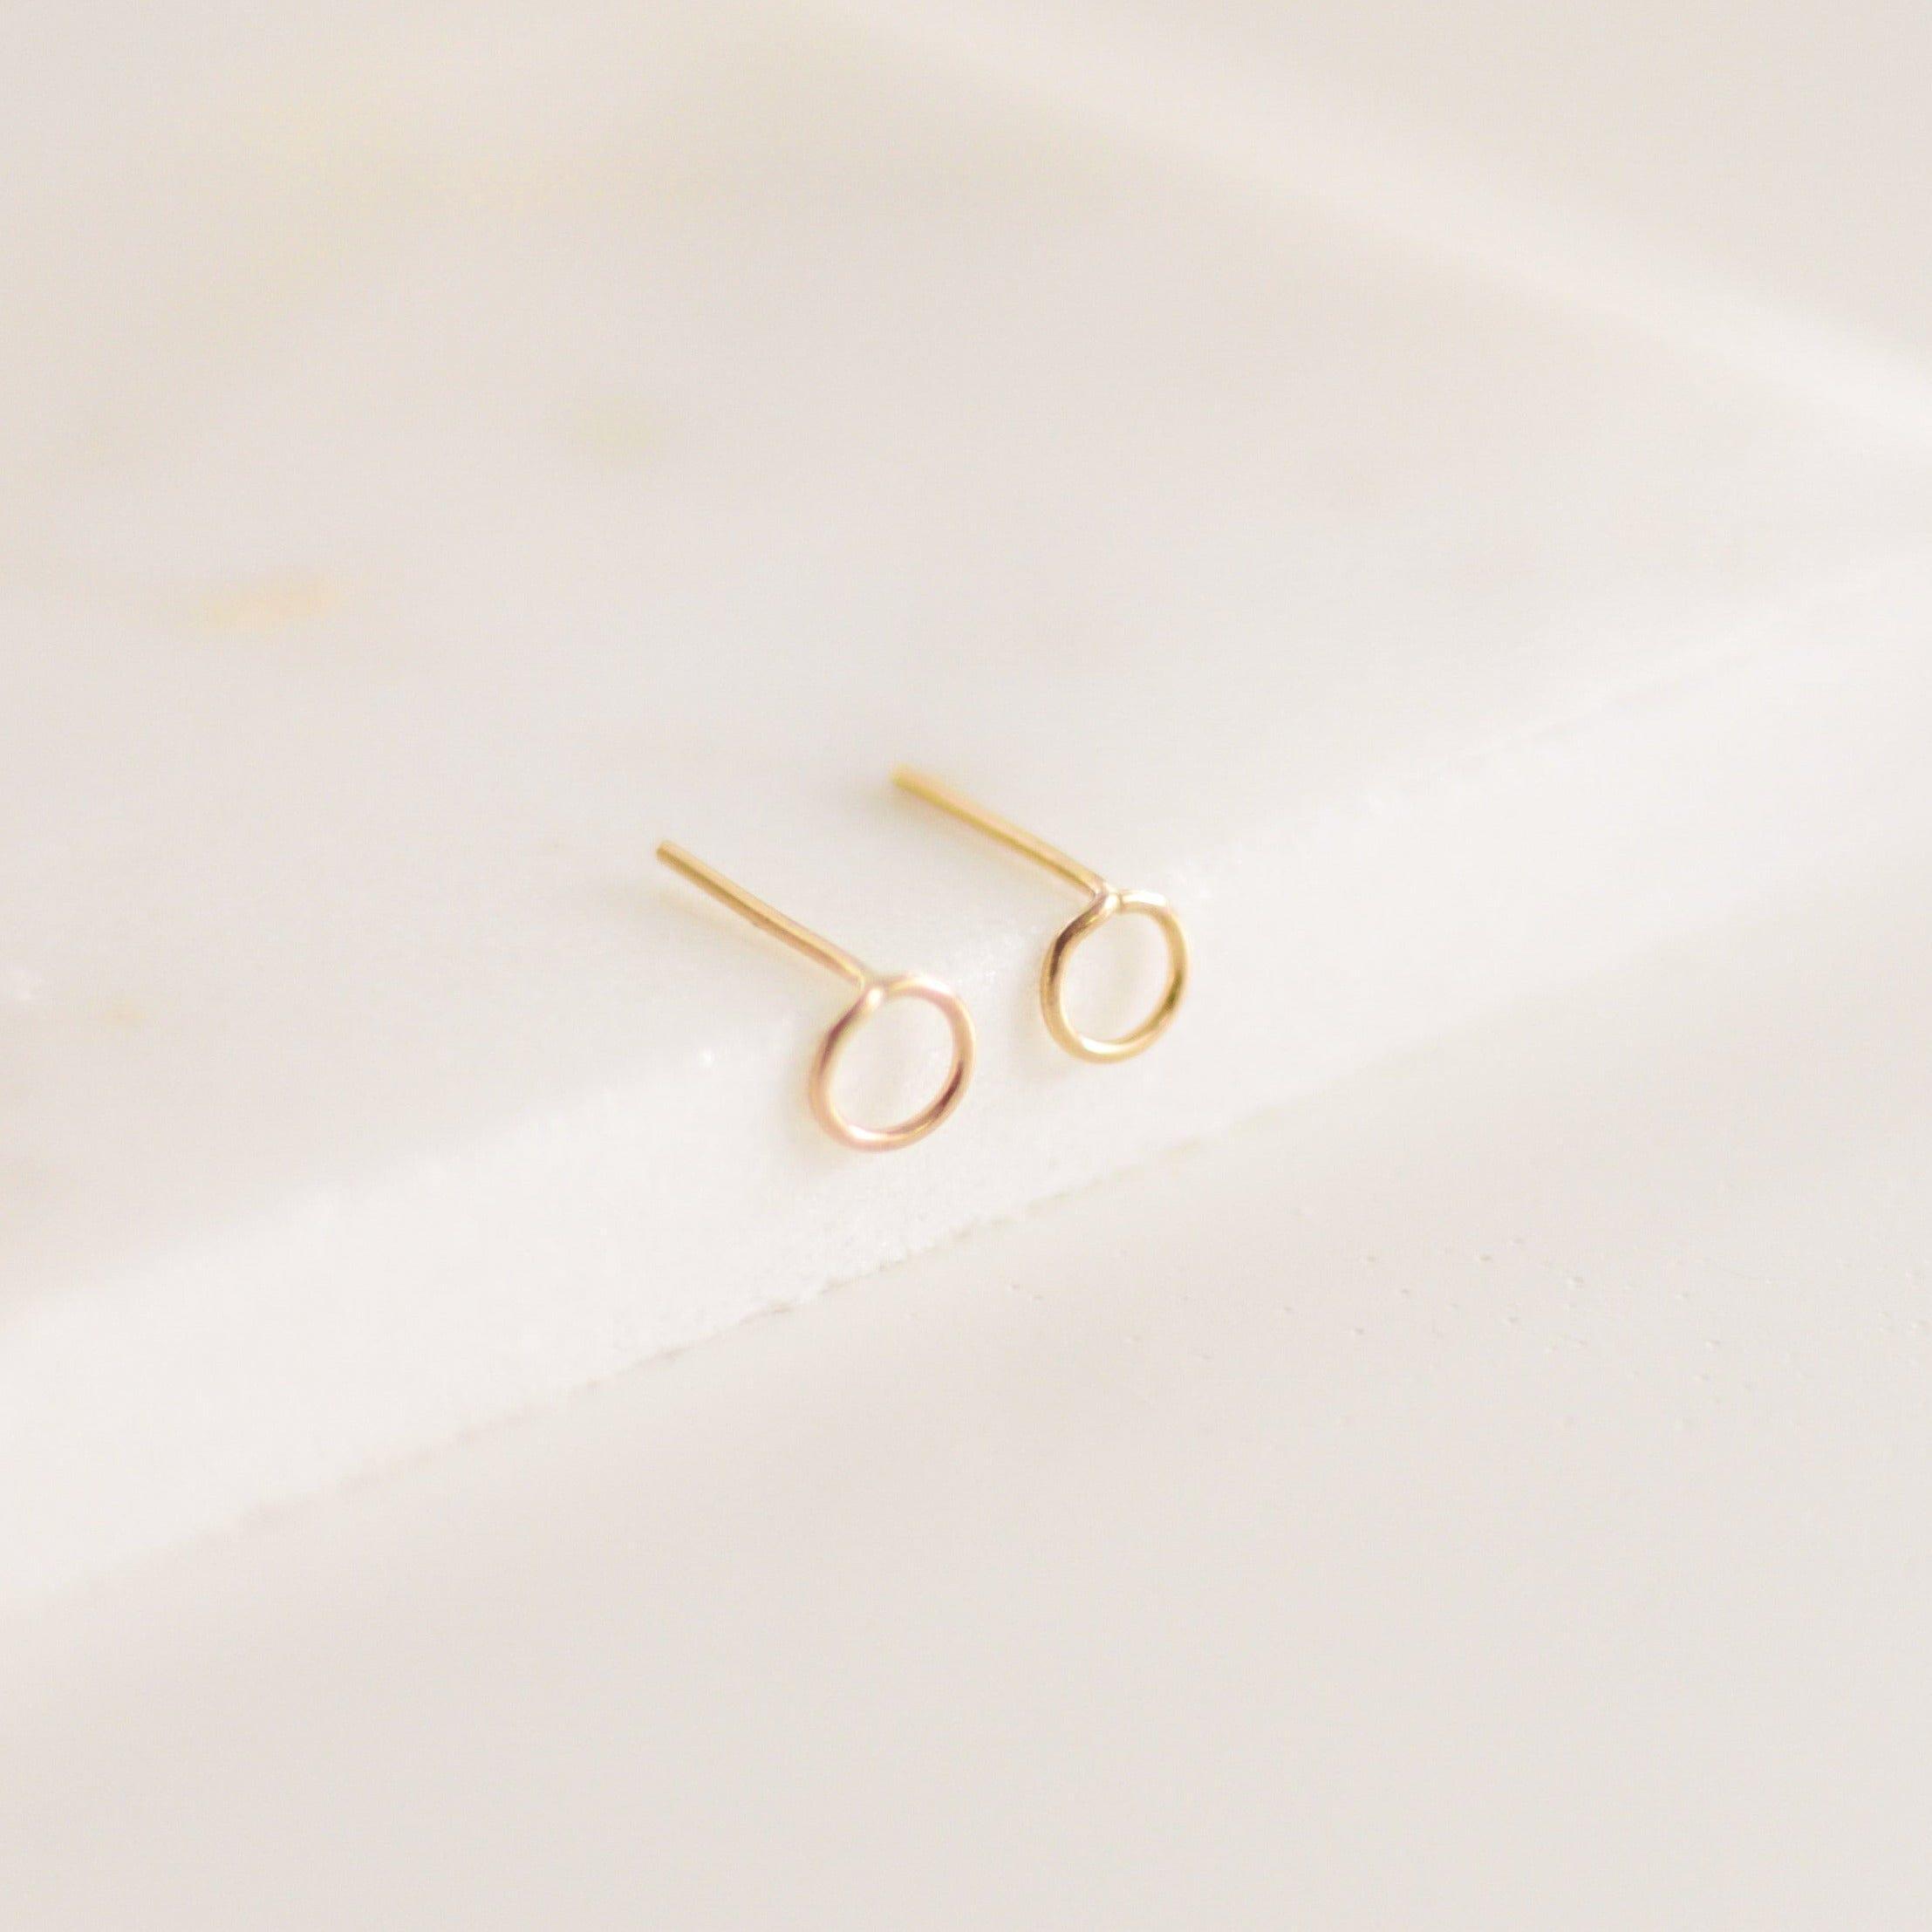 Tiny Circle Stud Earrings - Nolia Jewelry - Meaningful + Sustainably Handcrafted Jewelry